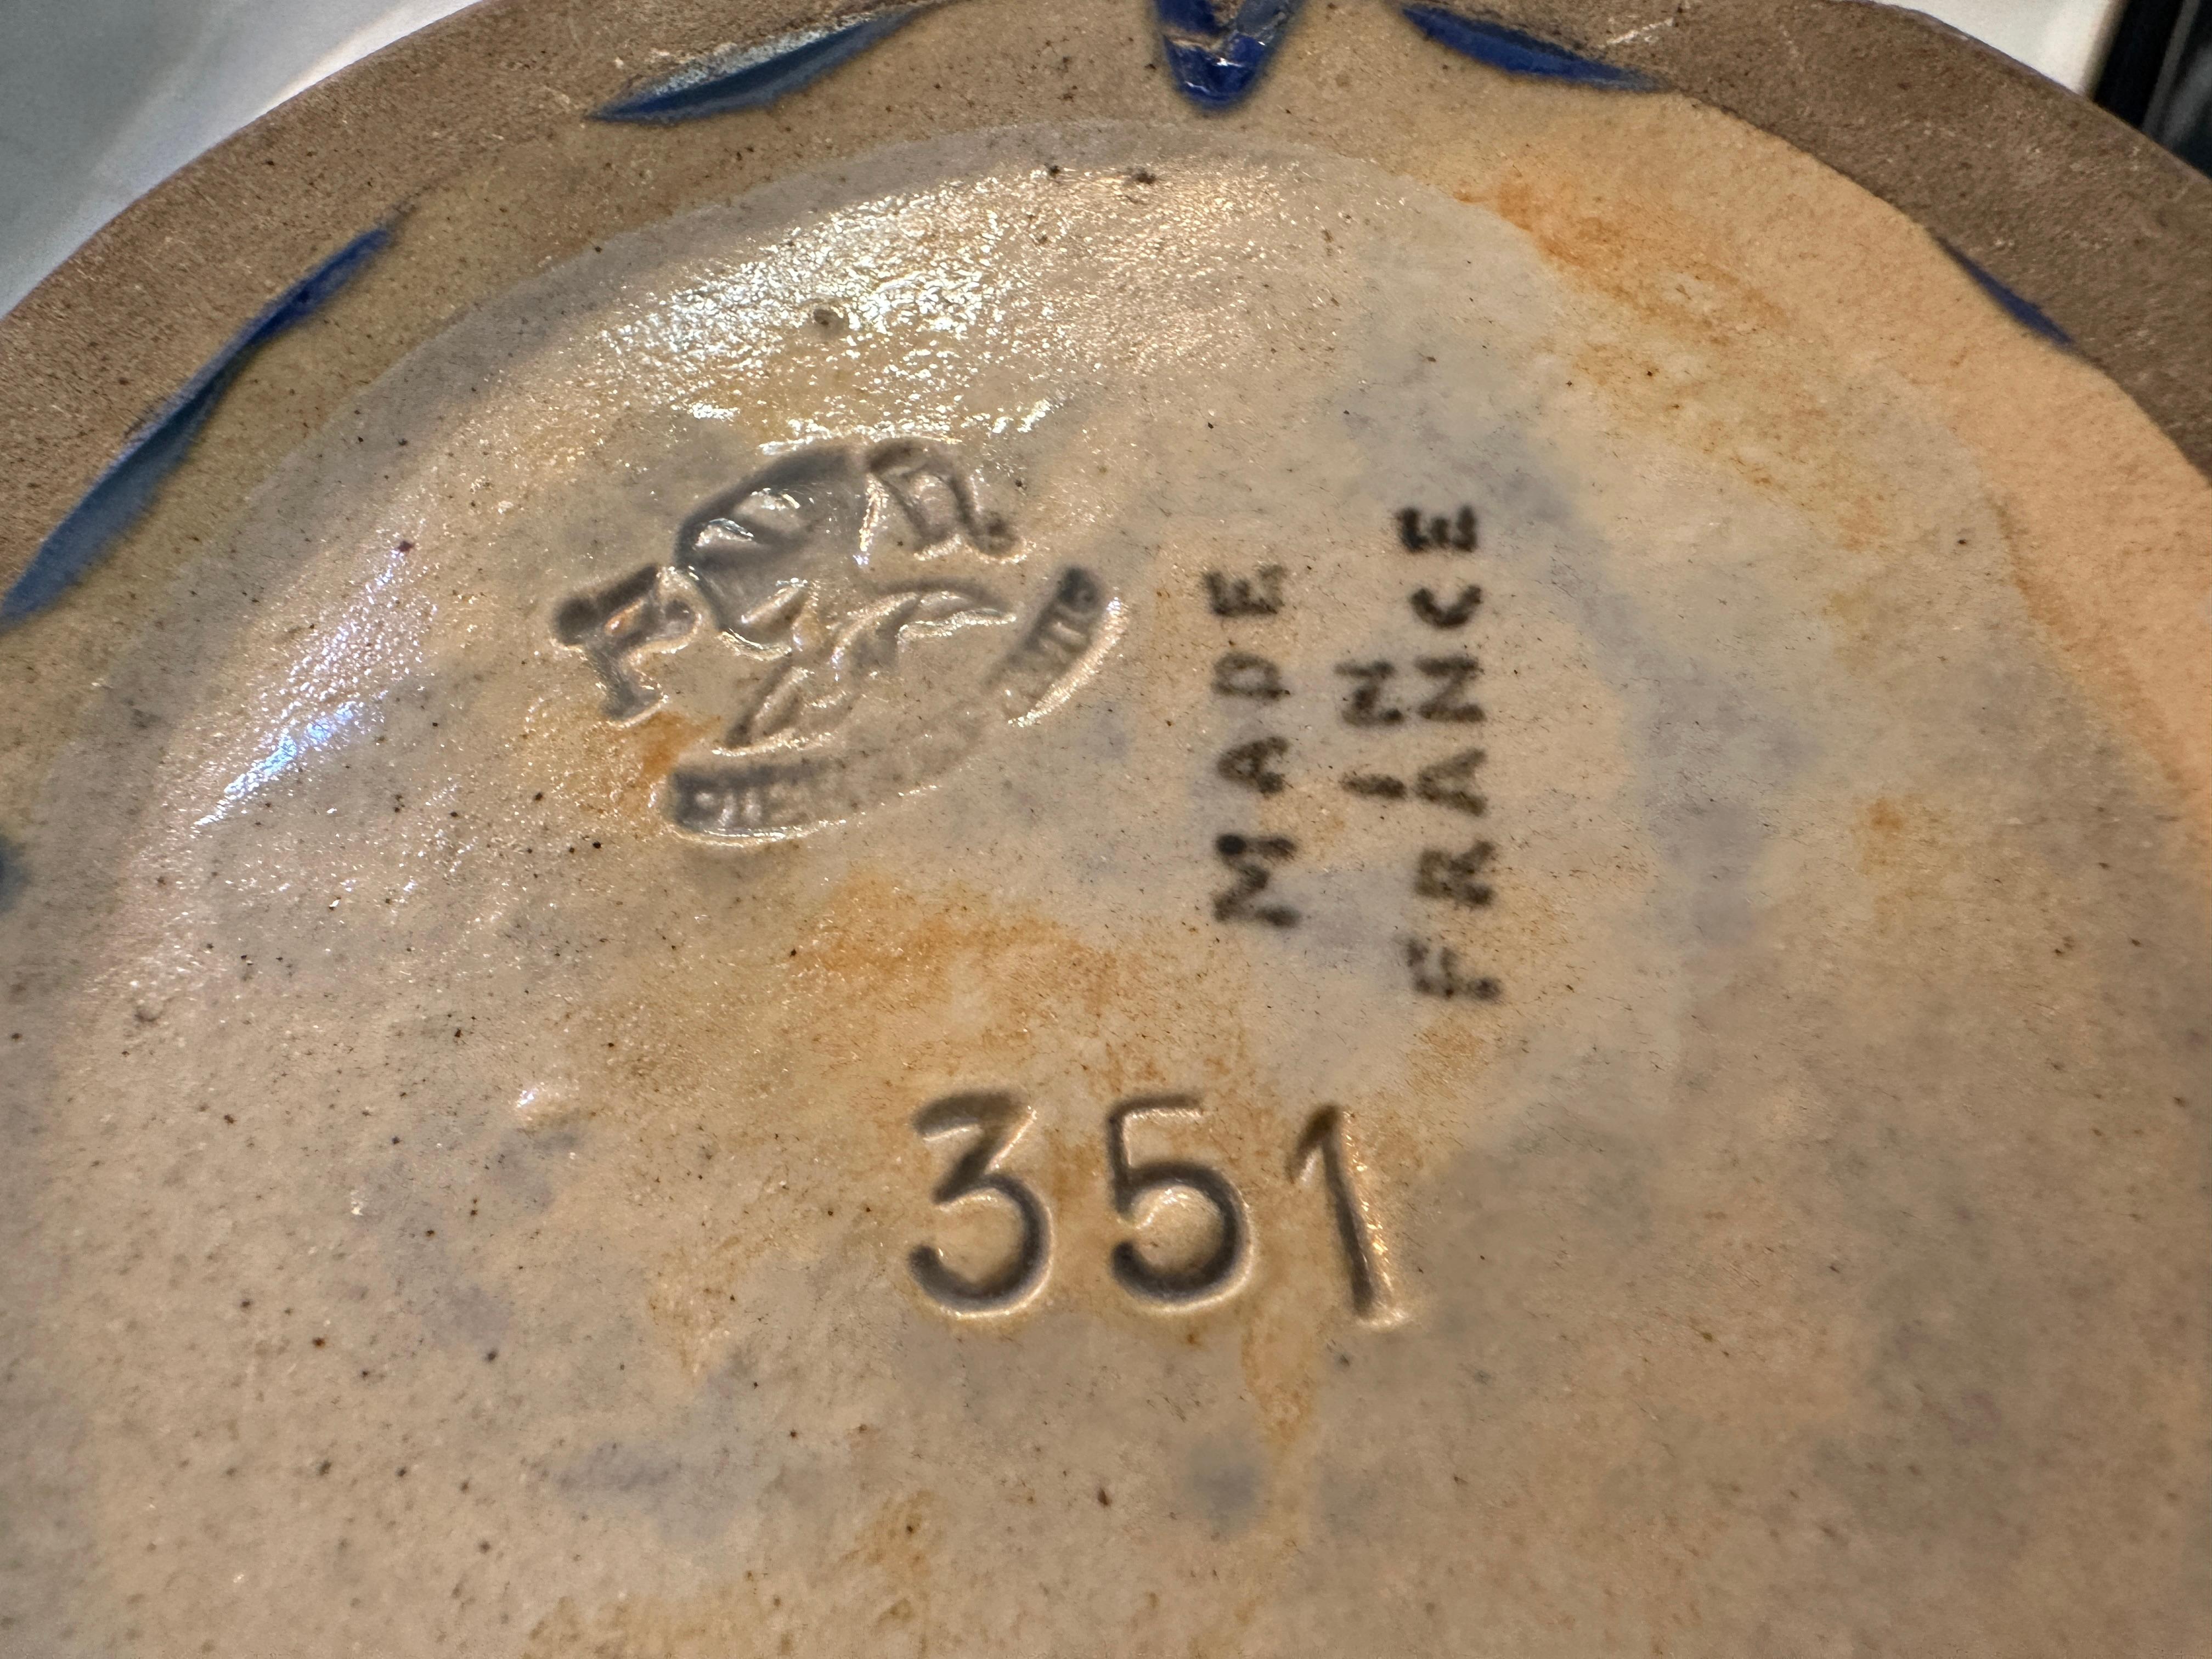 Ceramic, Sign: Pierrefonds, Made in France, 351 For Sale 5